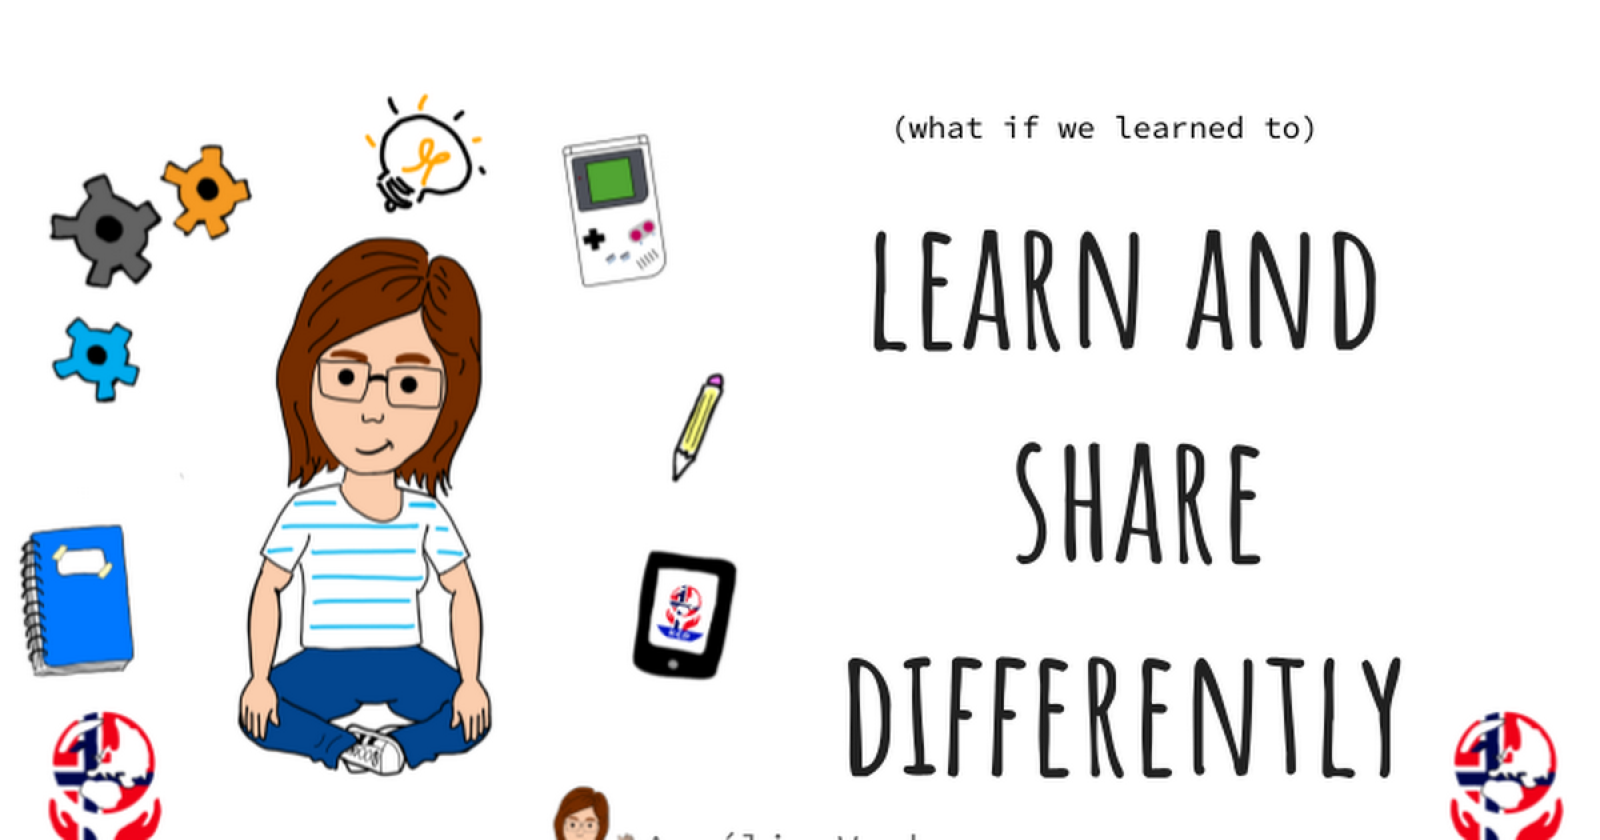  (What if we learned to) Learn and share differently